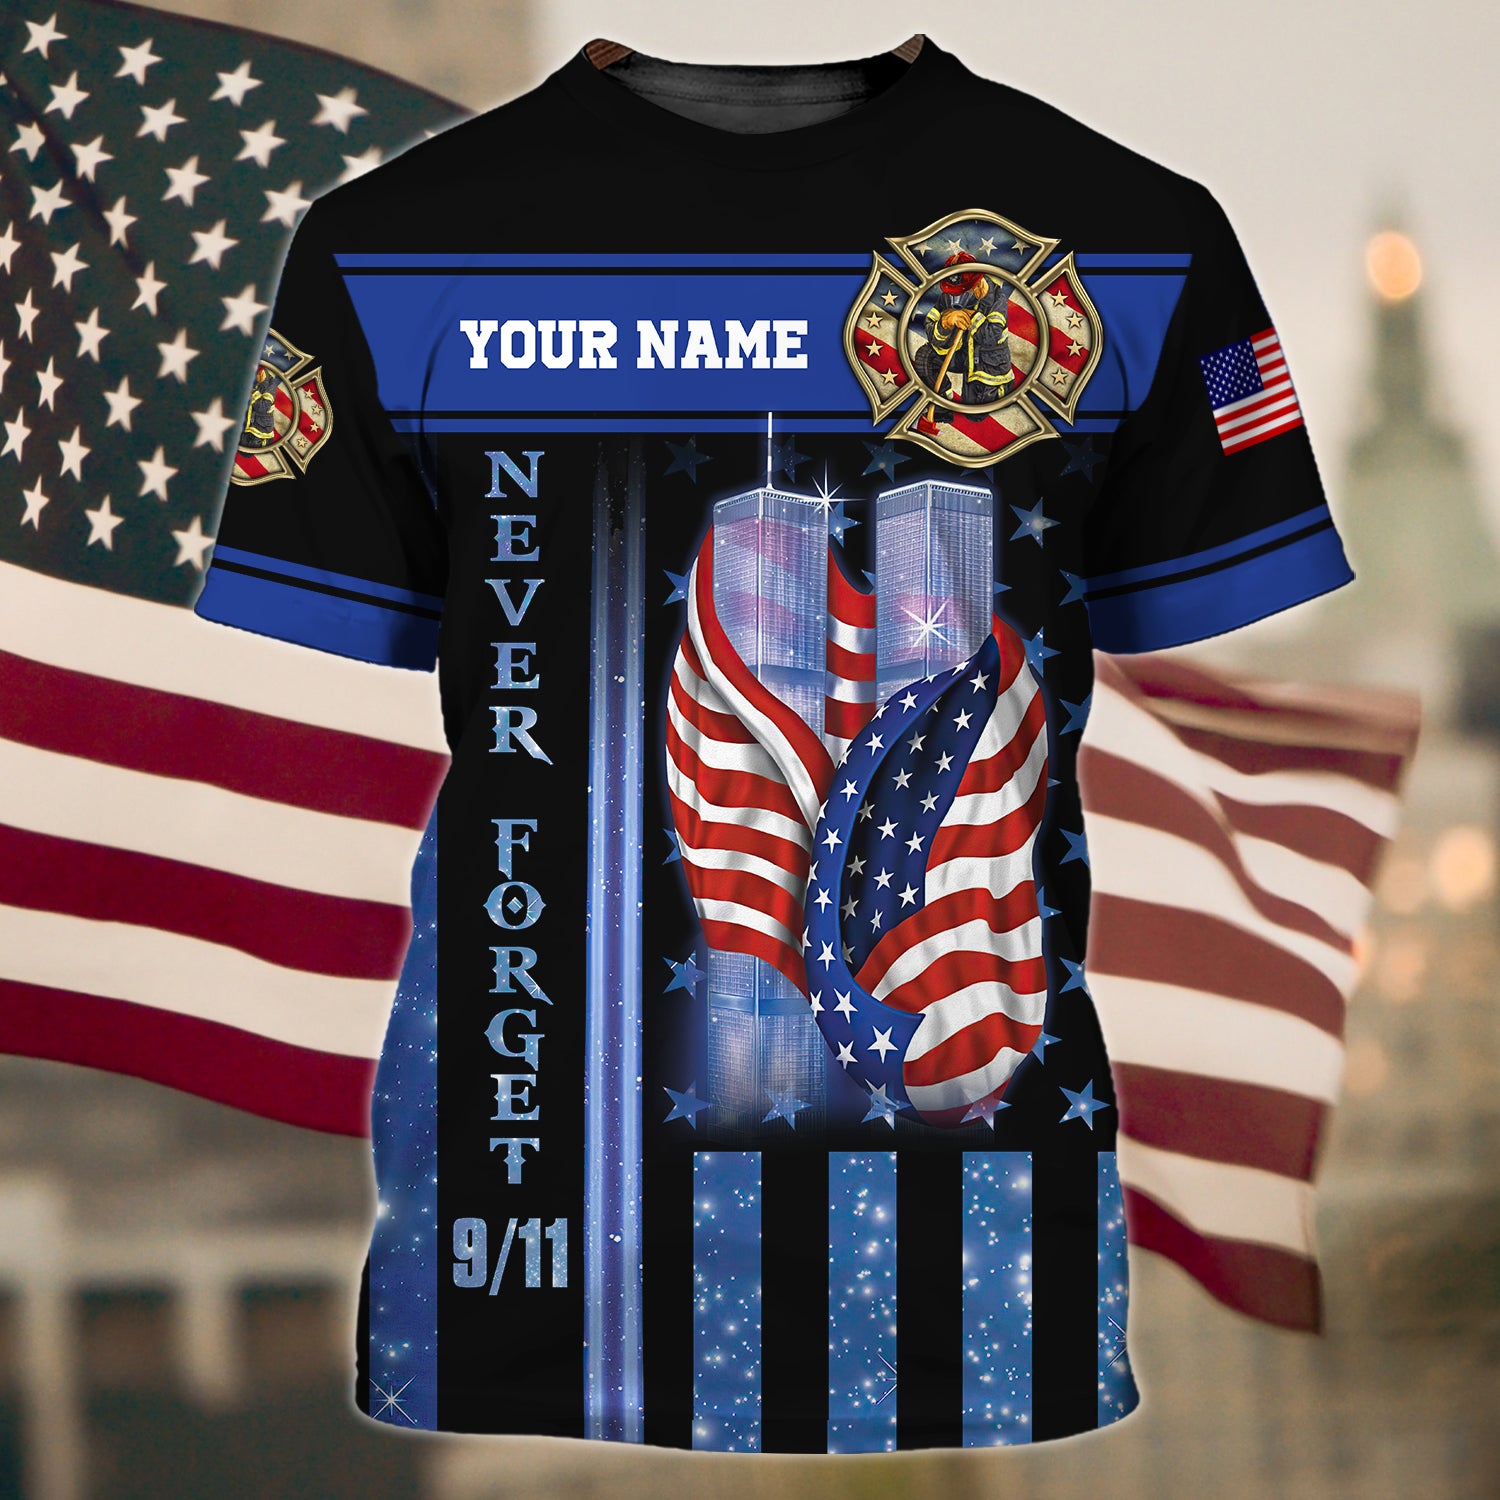 9.11 NEVER FORGET - Personalized Name 3D Tshirt 01 - CV98